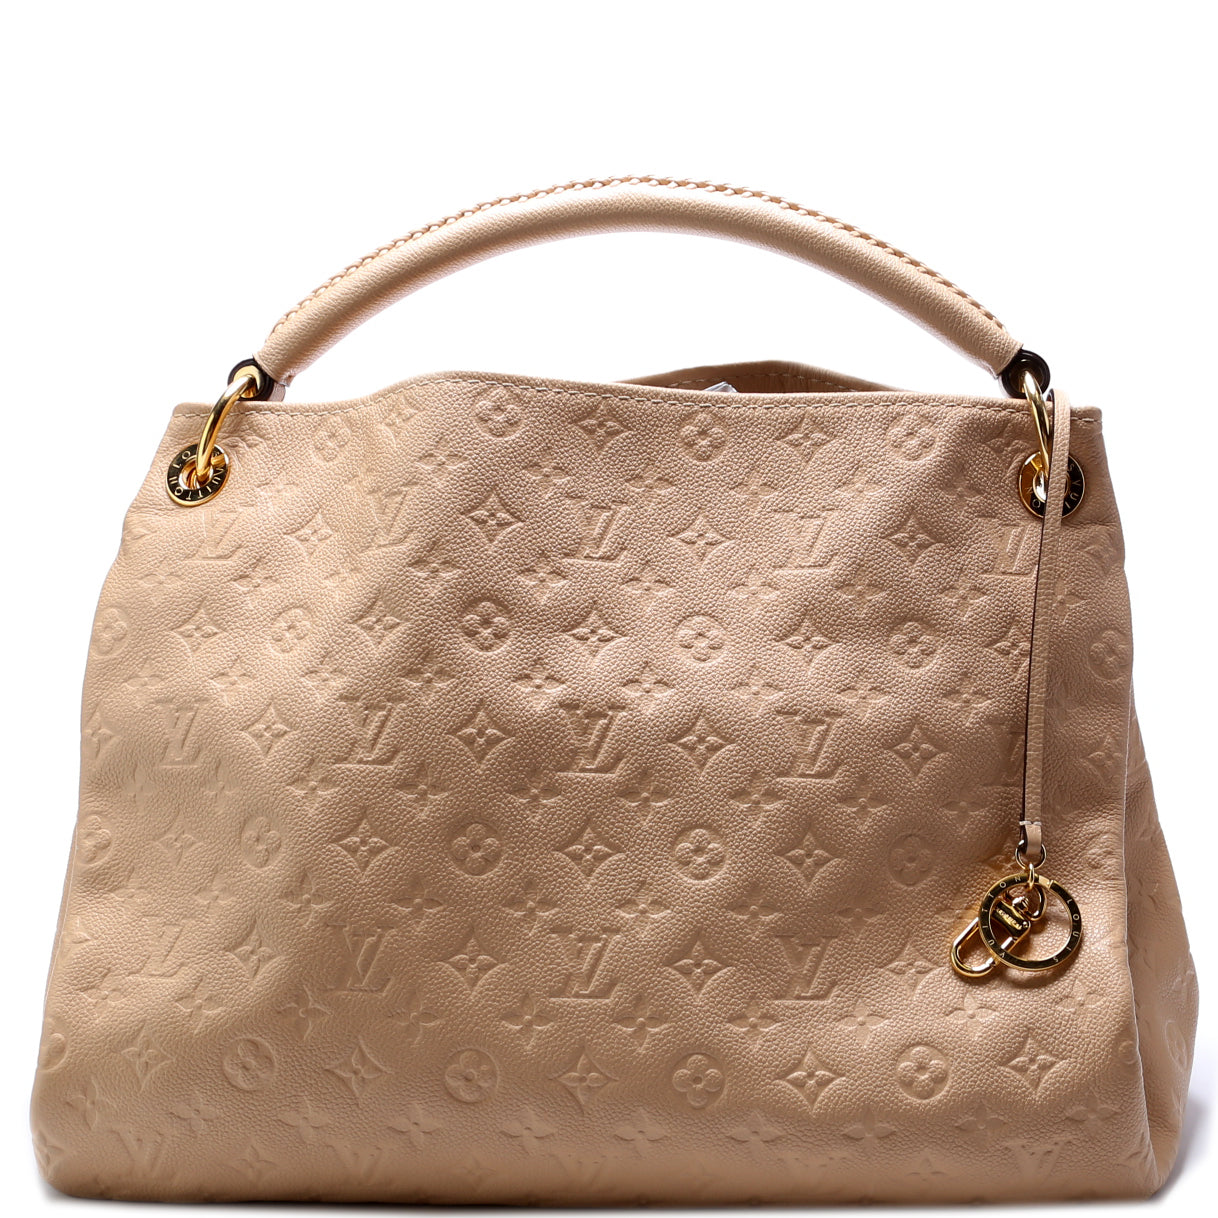 Louis Vuitton Artsy Leather Exterior Bags & Handbags for Women, Authenticity Guaranteed